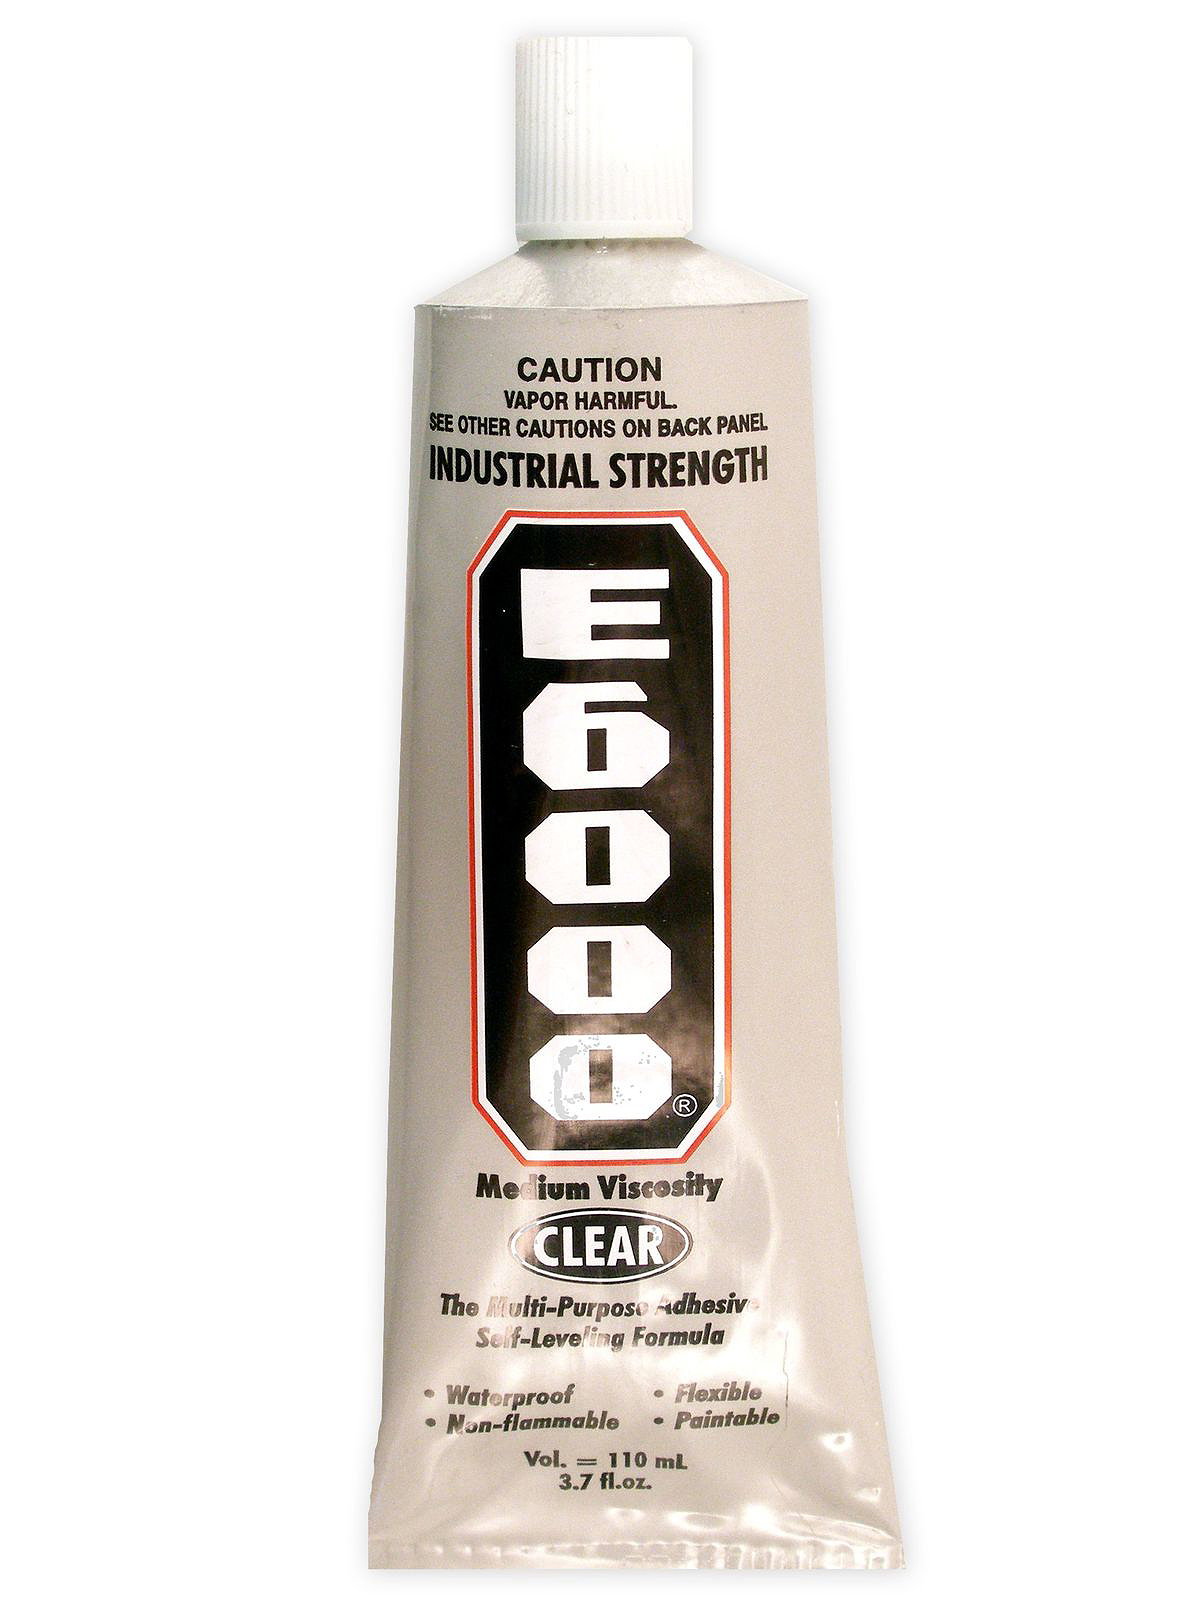 E6000 Industrial Adhesive For Wood, Metal & More